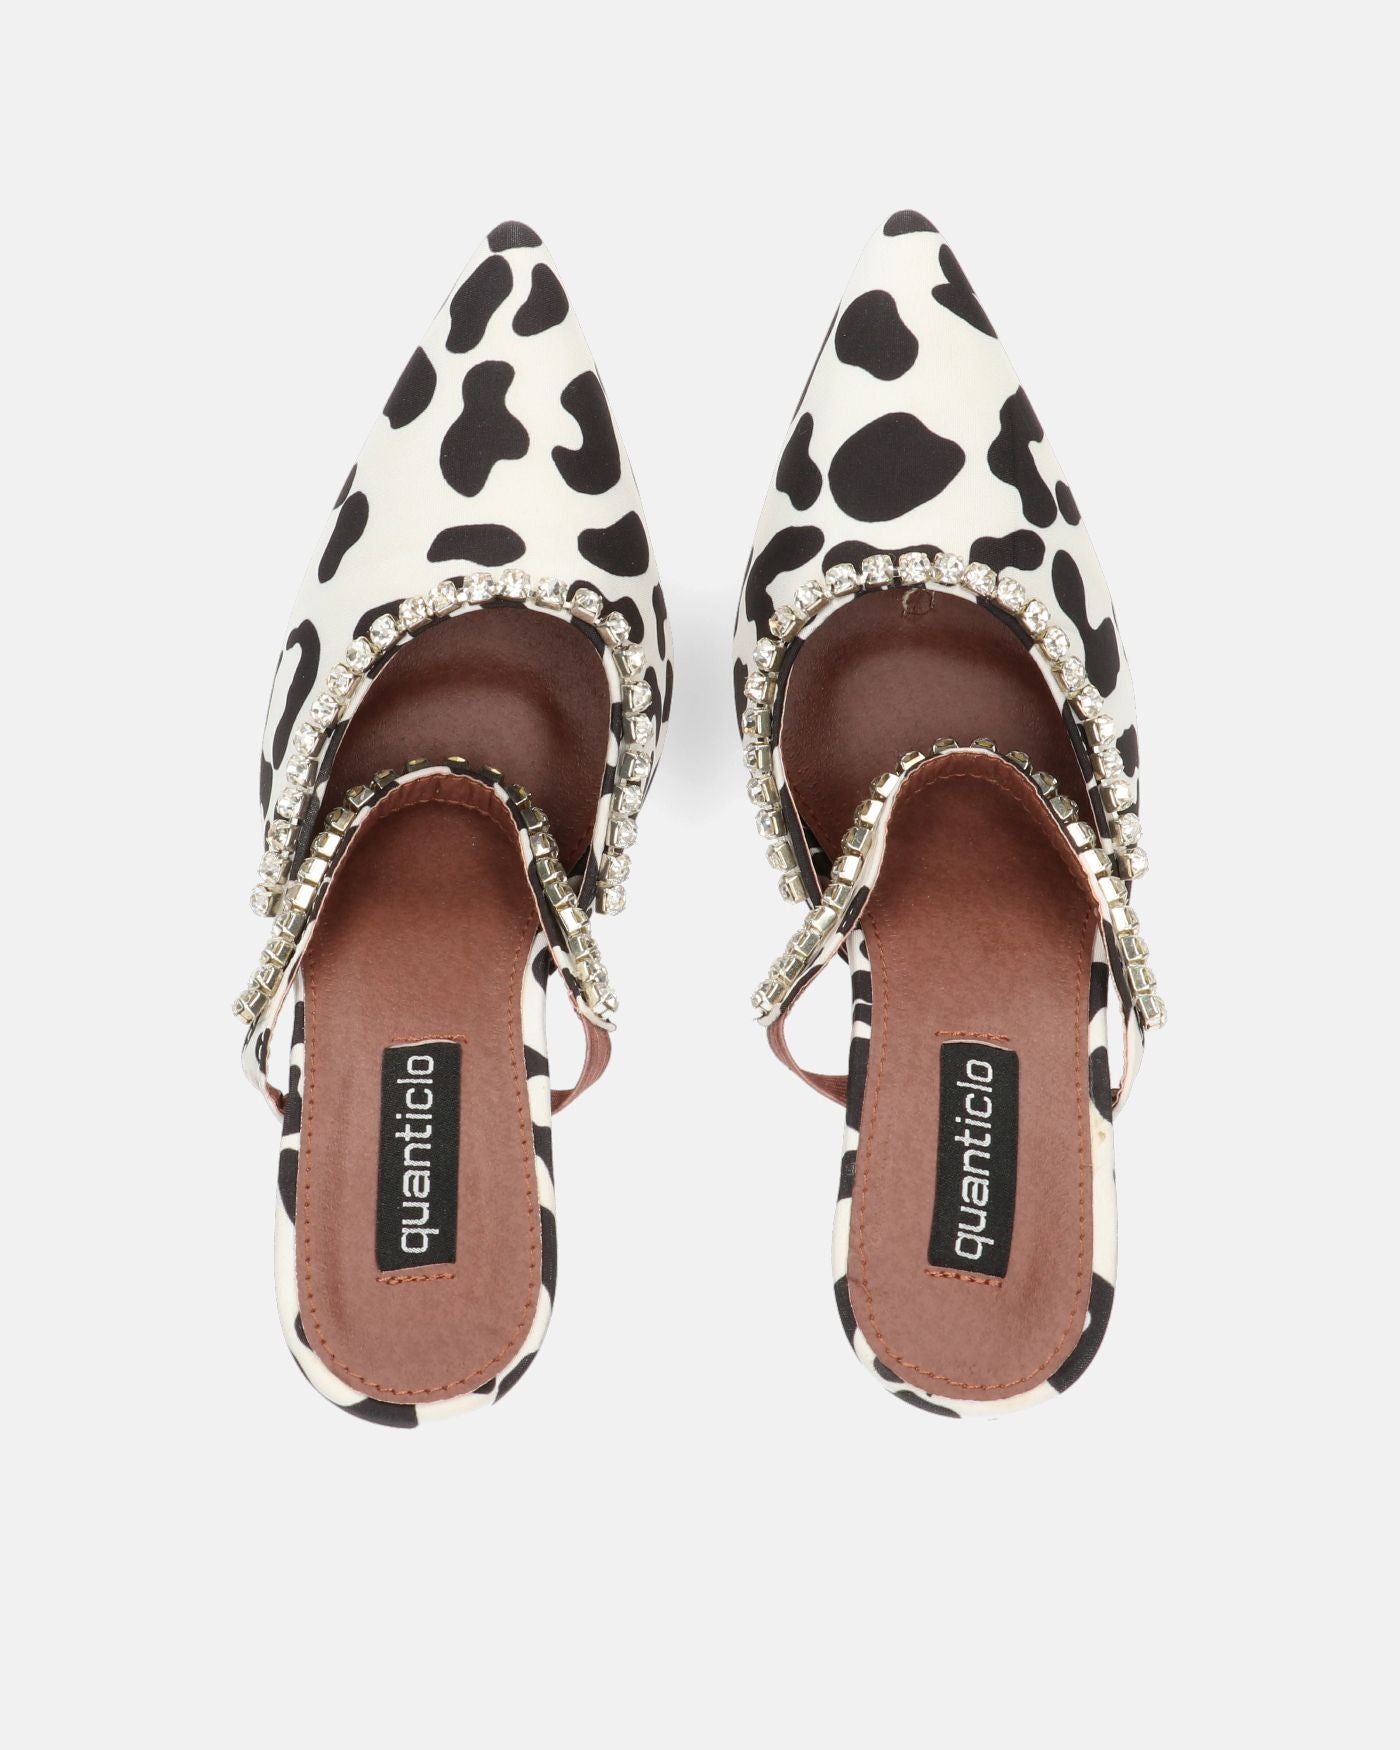 PERAL - heeled shoe in black and white leopard print with gems